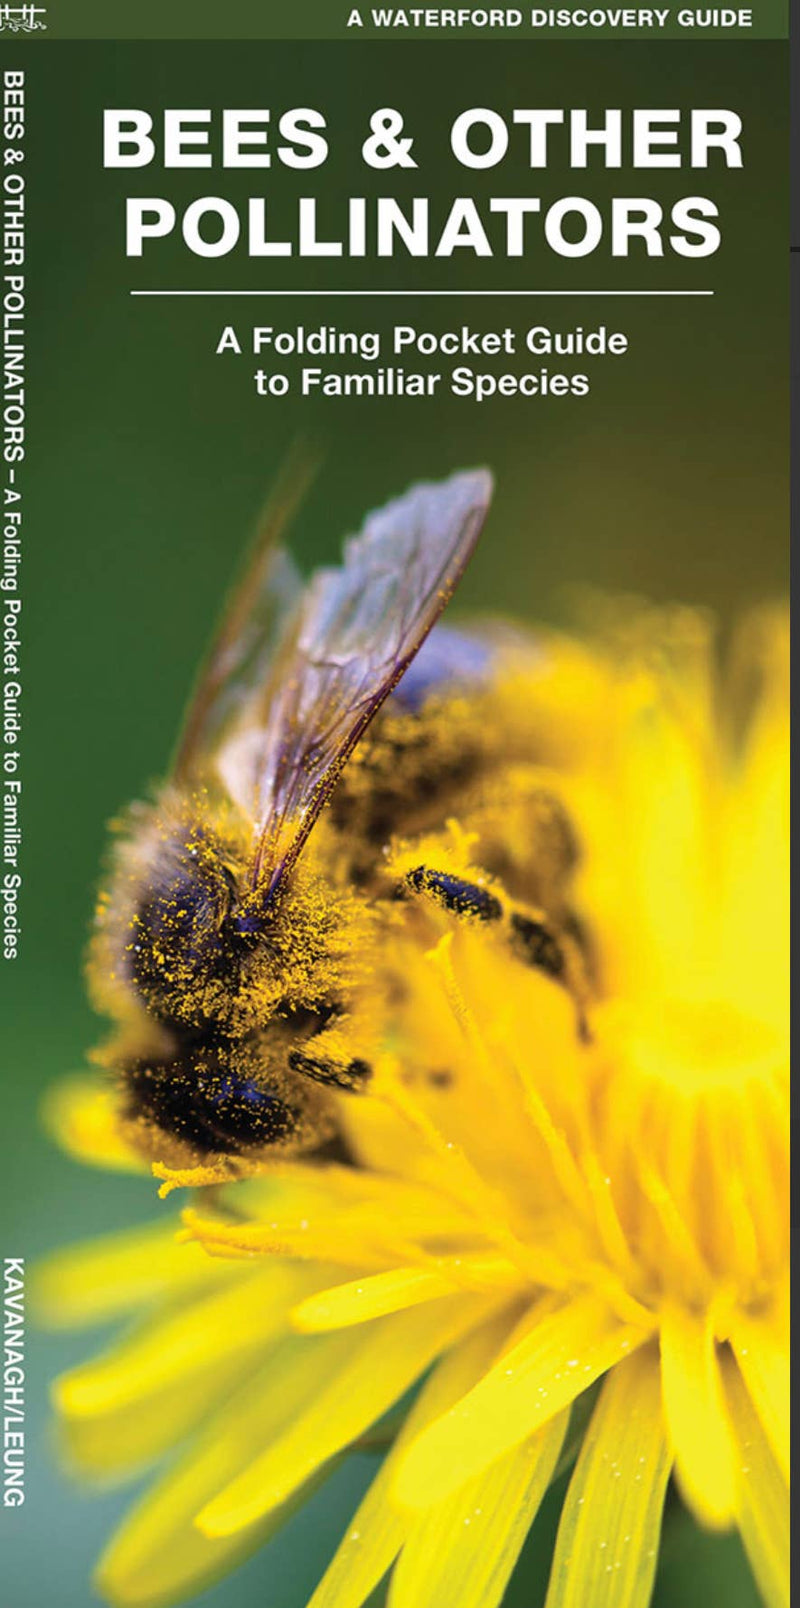 Waterford Press - Bees & Other Pollinators